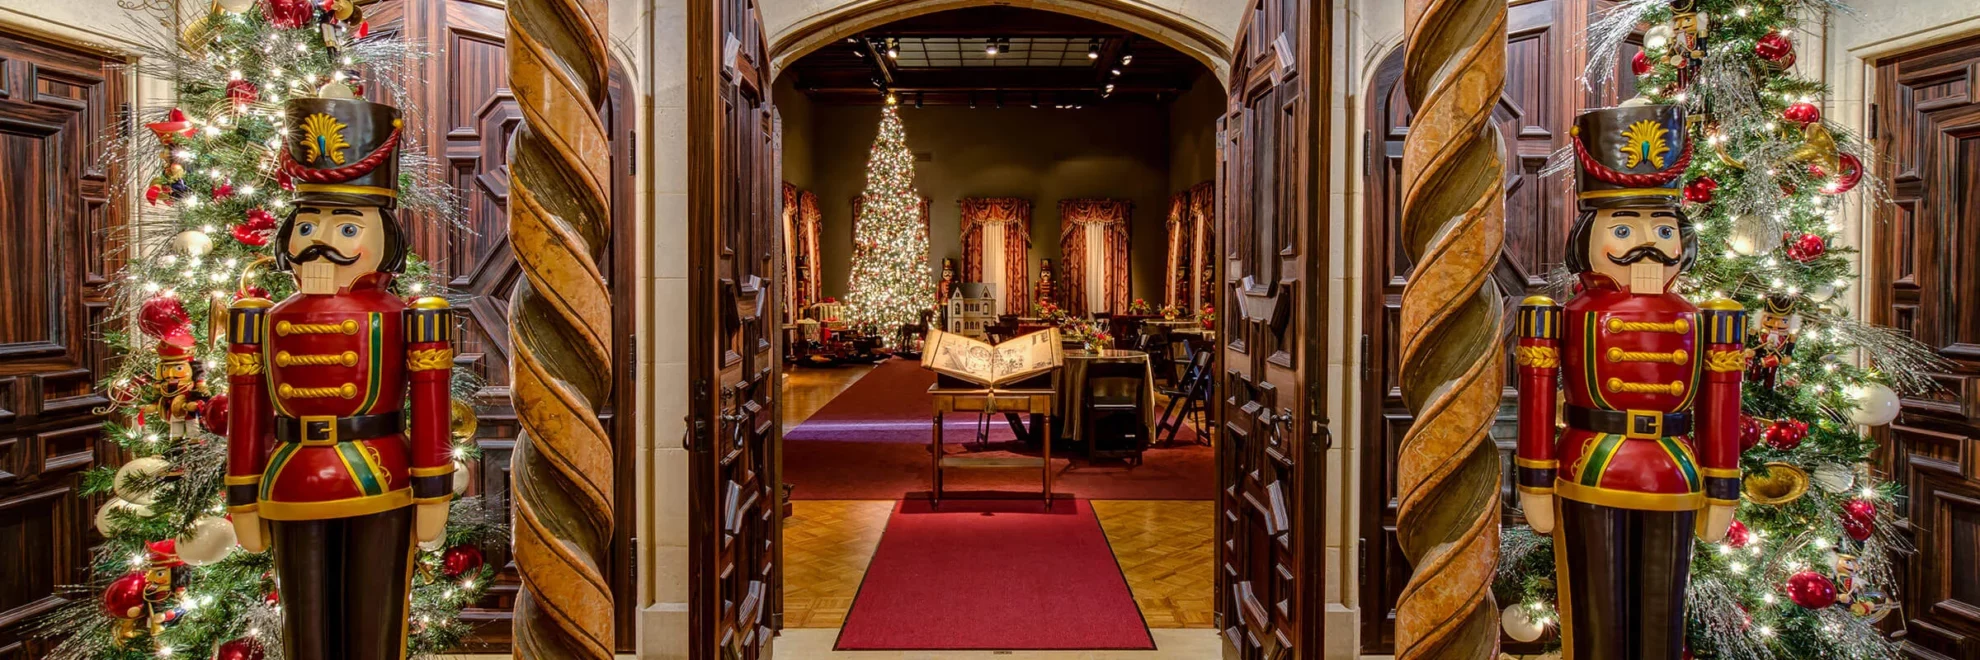 The Main Gallery and foyer during Nutcracker in the Castle, with life-size Nutcrackers, Christmas trees, and a room decorated in the background.